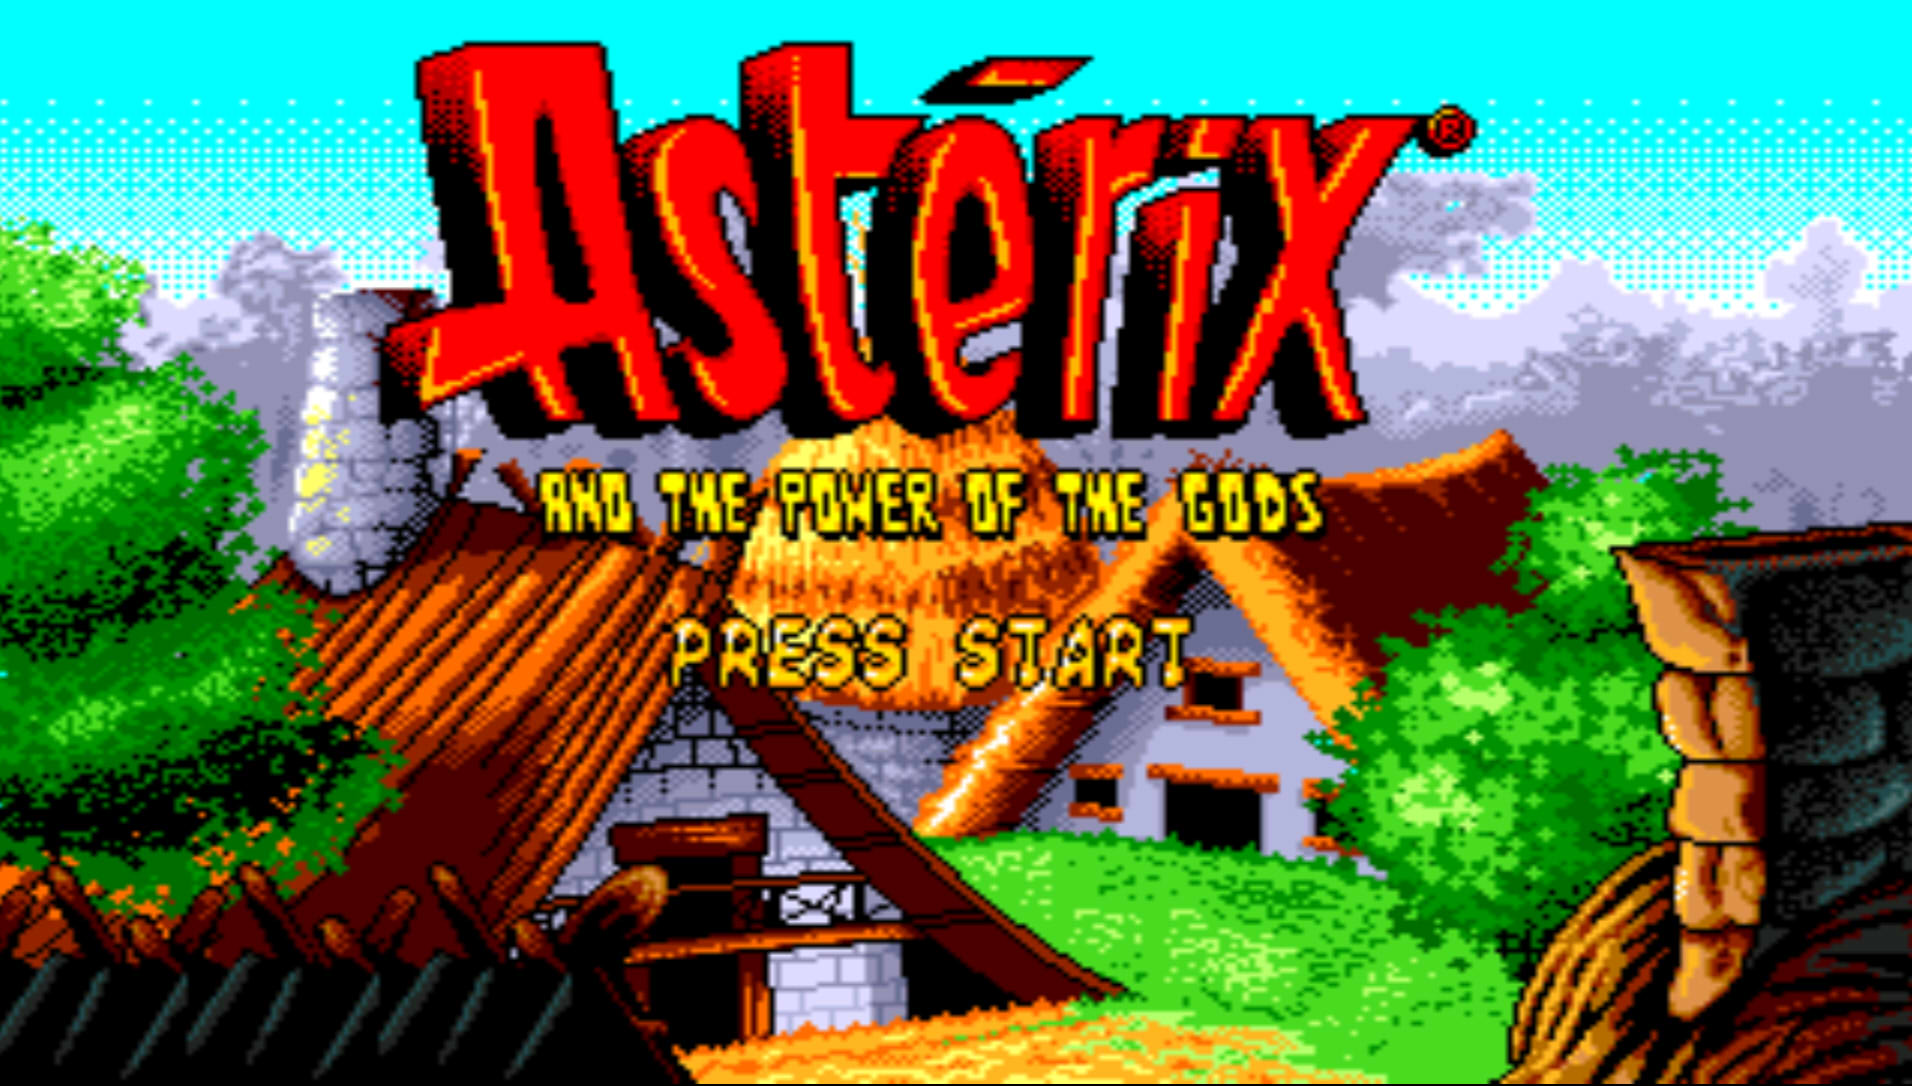 download asterix power of the gods